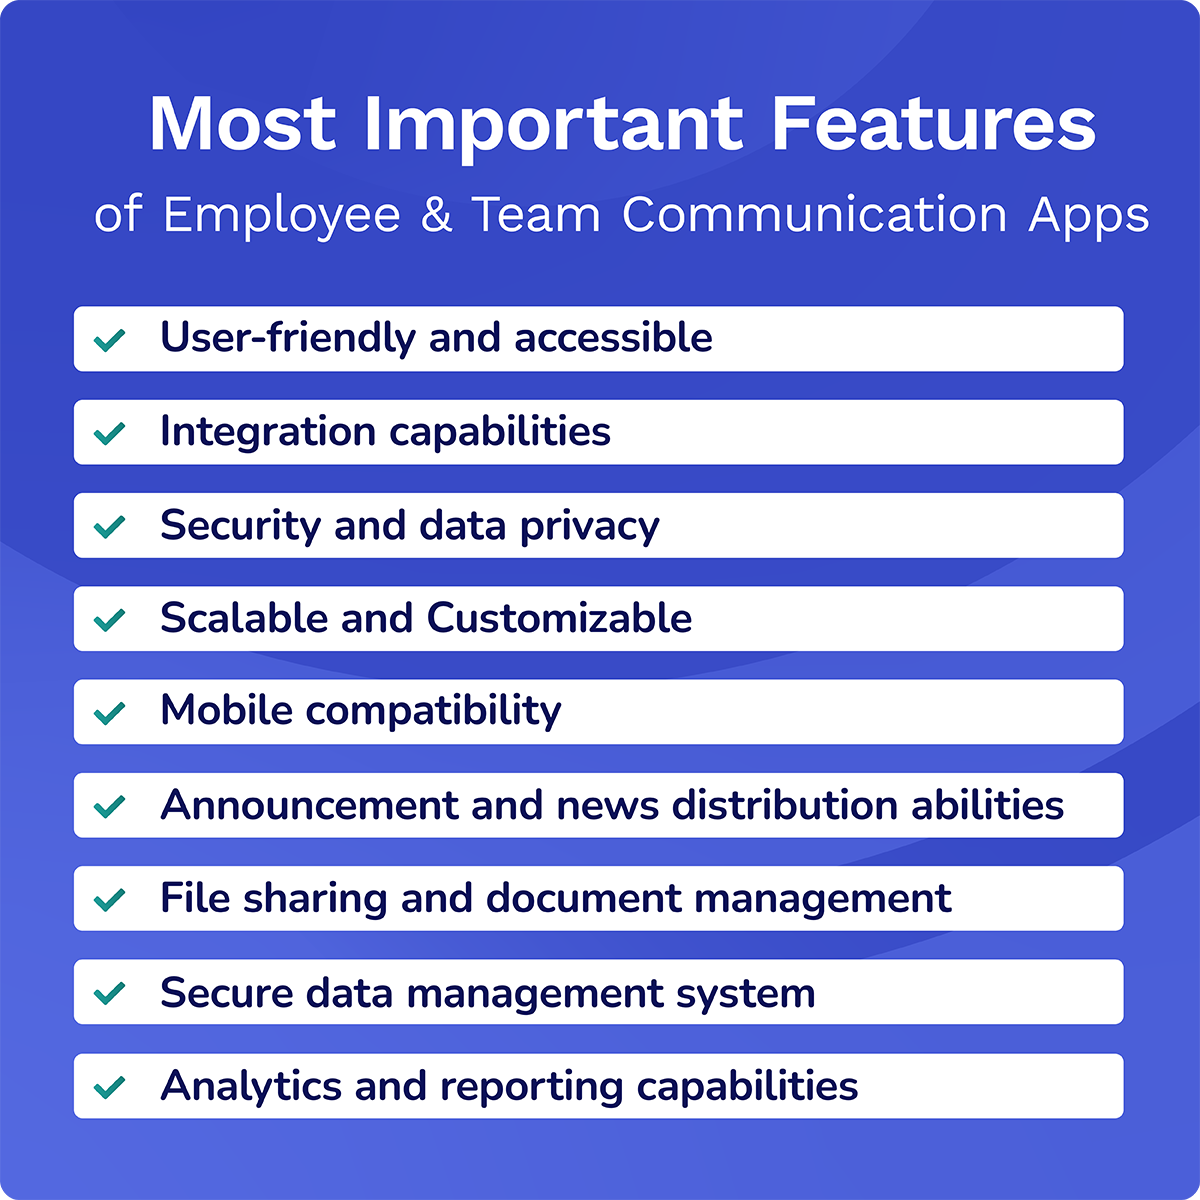 team communication apps most important features